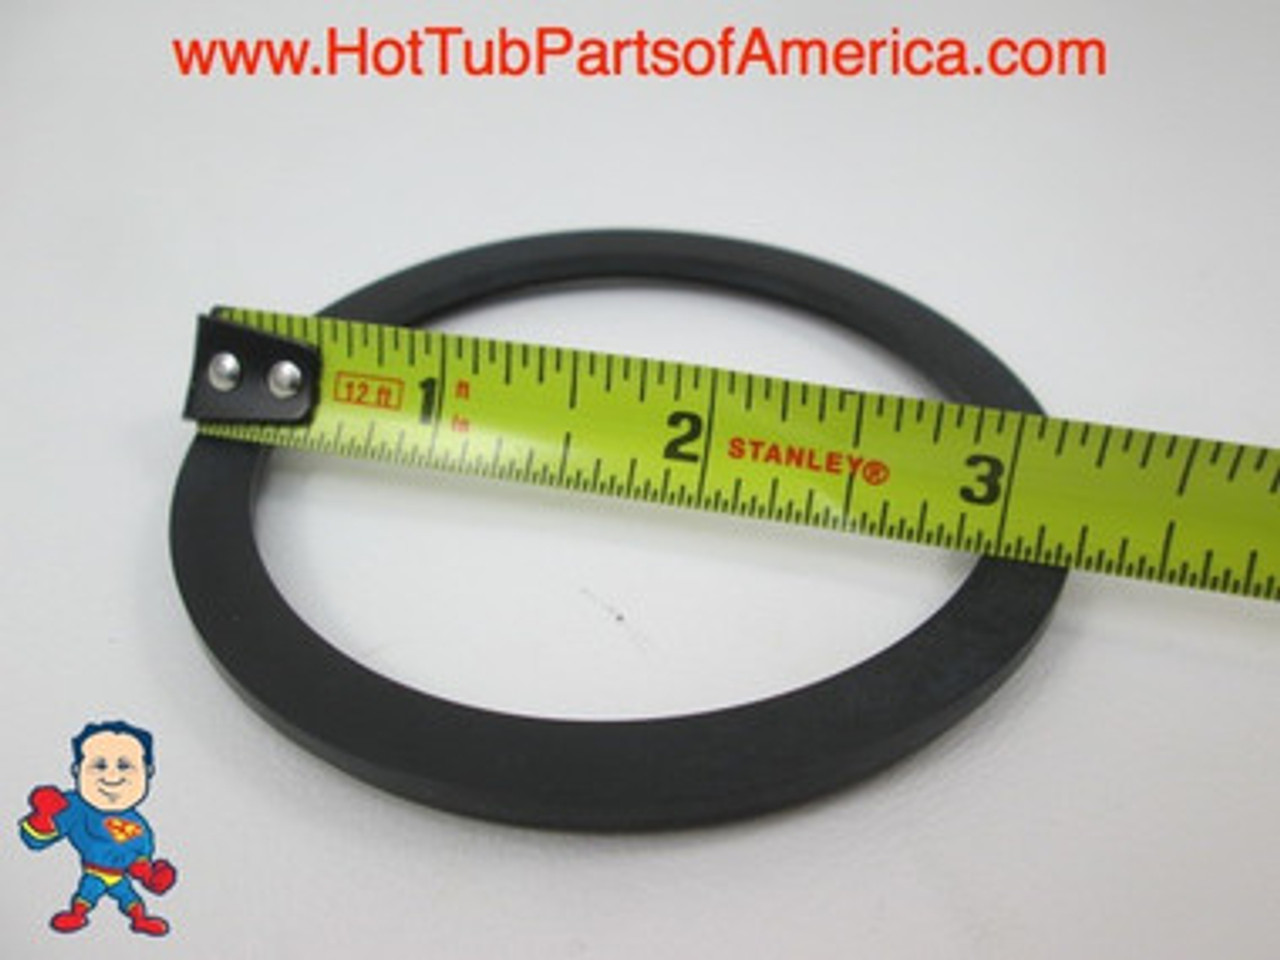 Hot Tub Spa 2 1/2" X 2" Slip Heater Union & Gasket How to Video